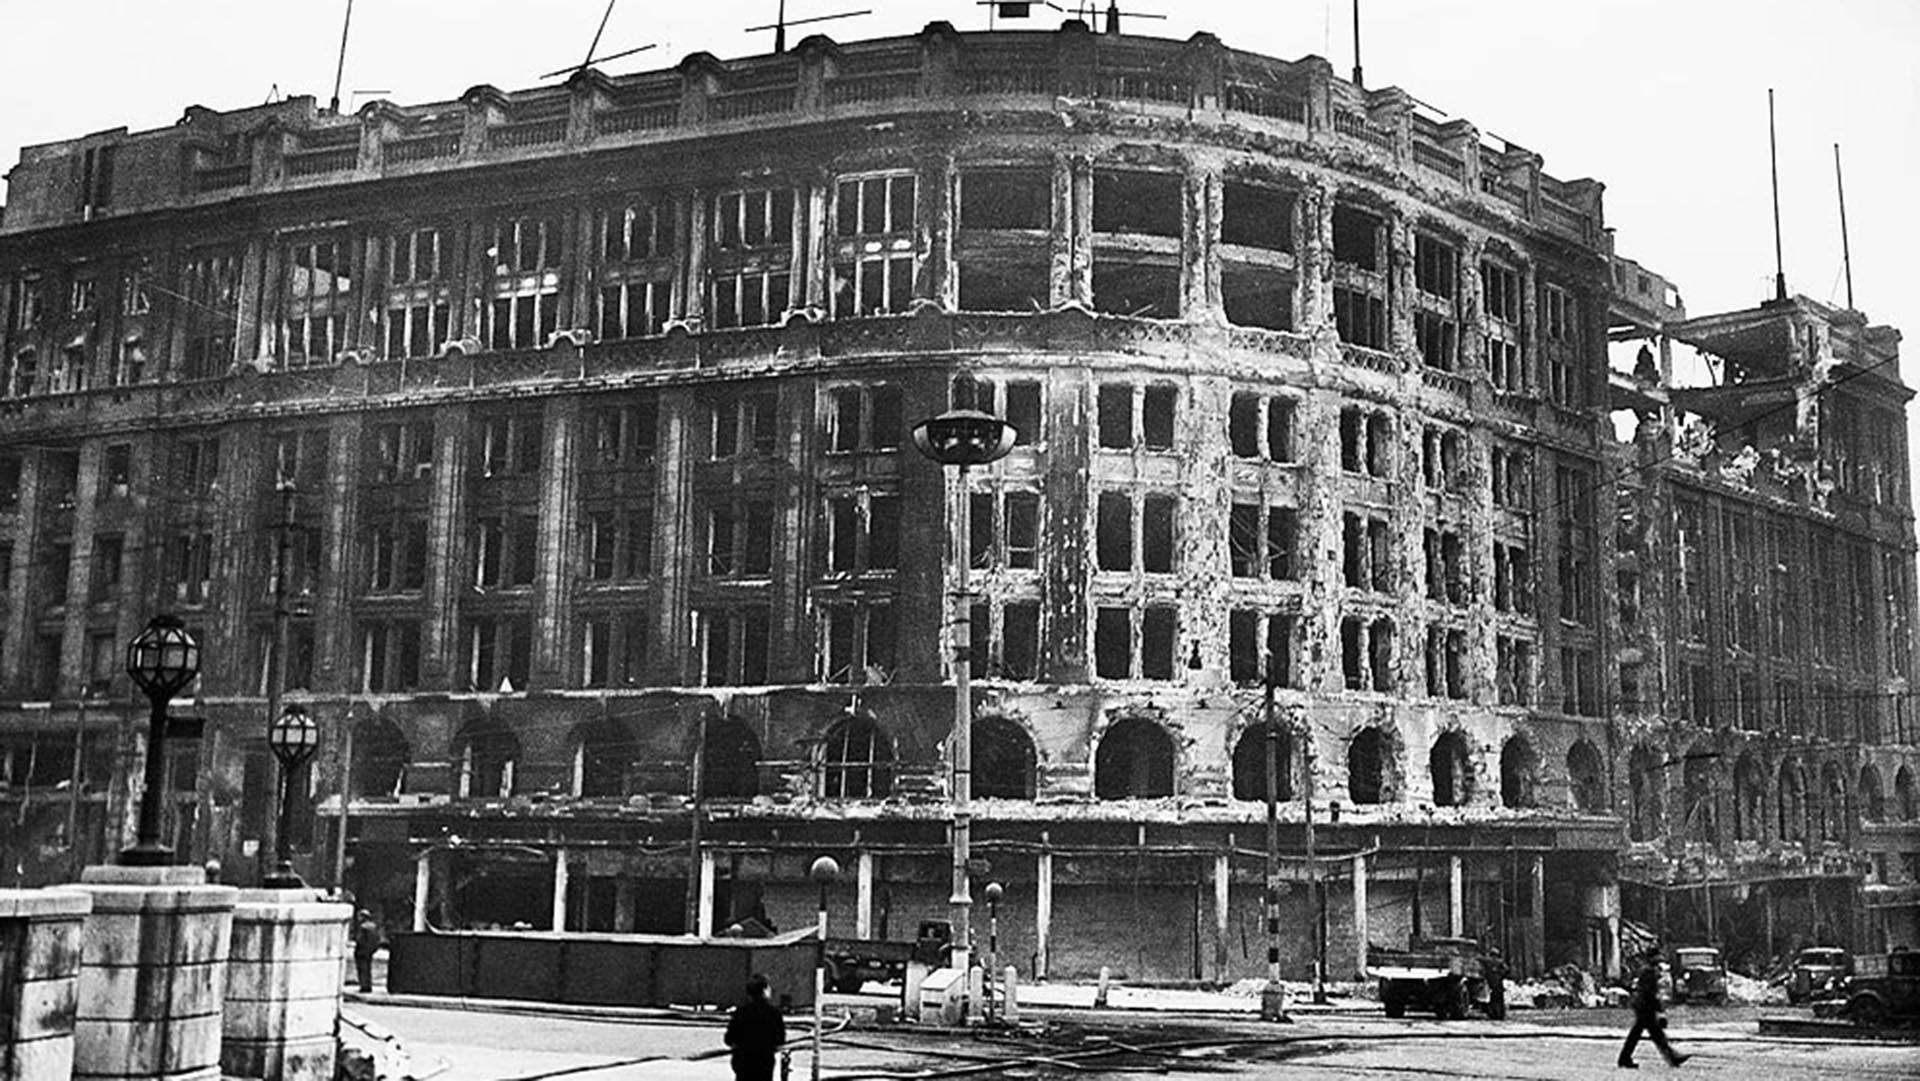 Remains of Lewis’s Department Store after the Liverpool Blitz